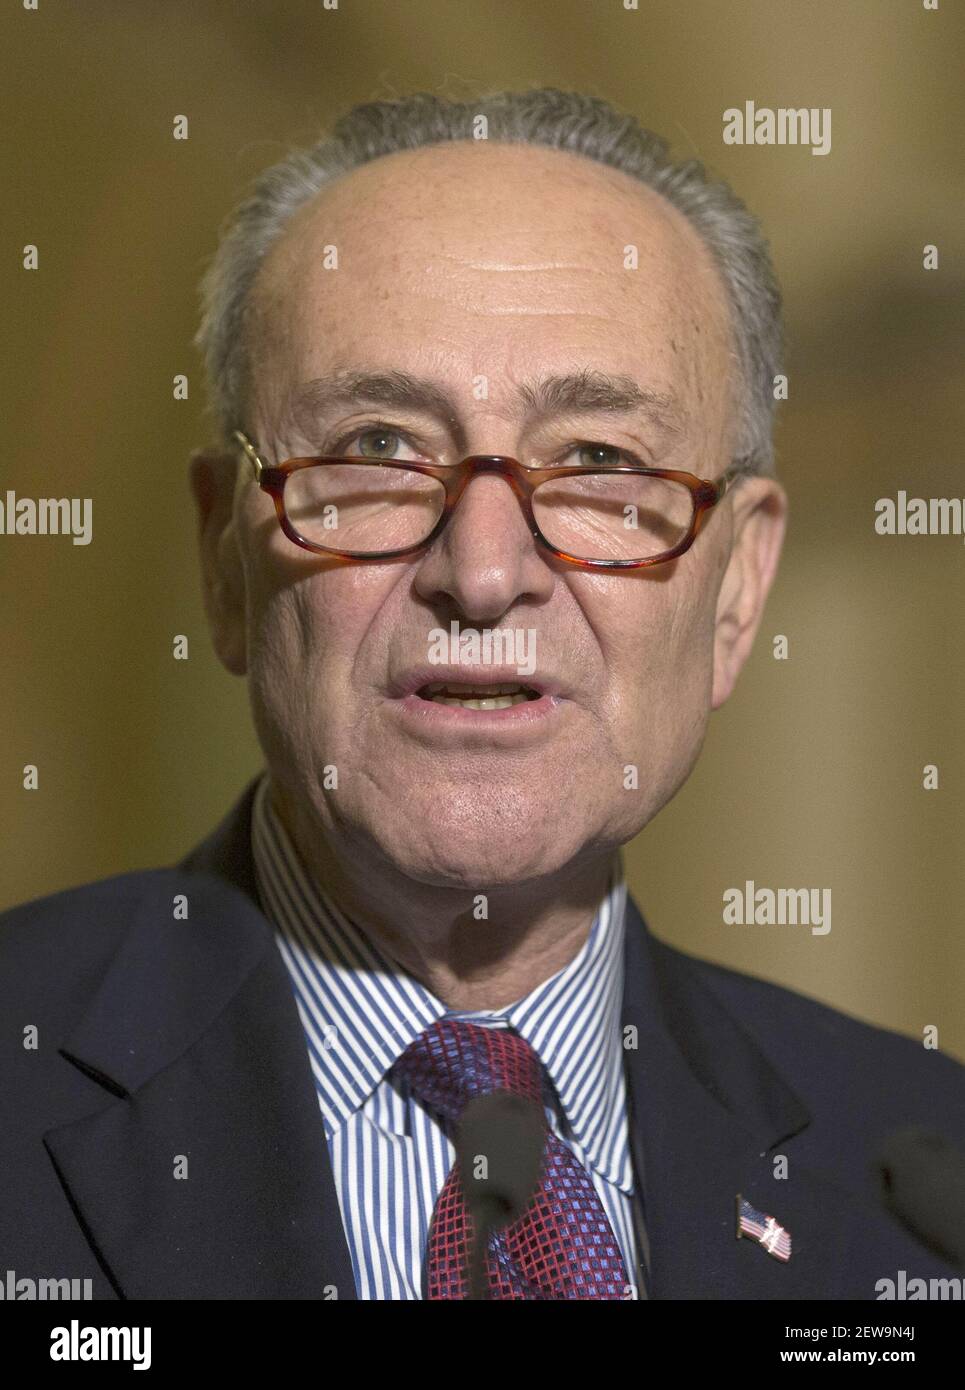 United States Senate Minority Leader Senator Chuck Schumer, Democrat of New York, speaks with reporters following the weekly United States Senate Democratic Party policy luncheons on Capitol Hill on November 14, 2017 in Washington, D.C. (Photo by Alex Edelman / CNP /Sipa USA) Stock Photo